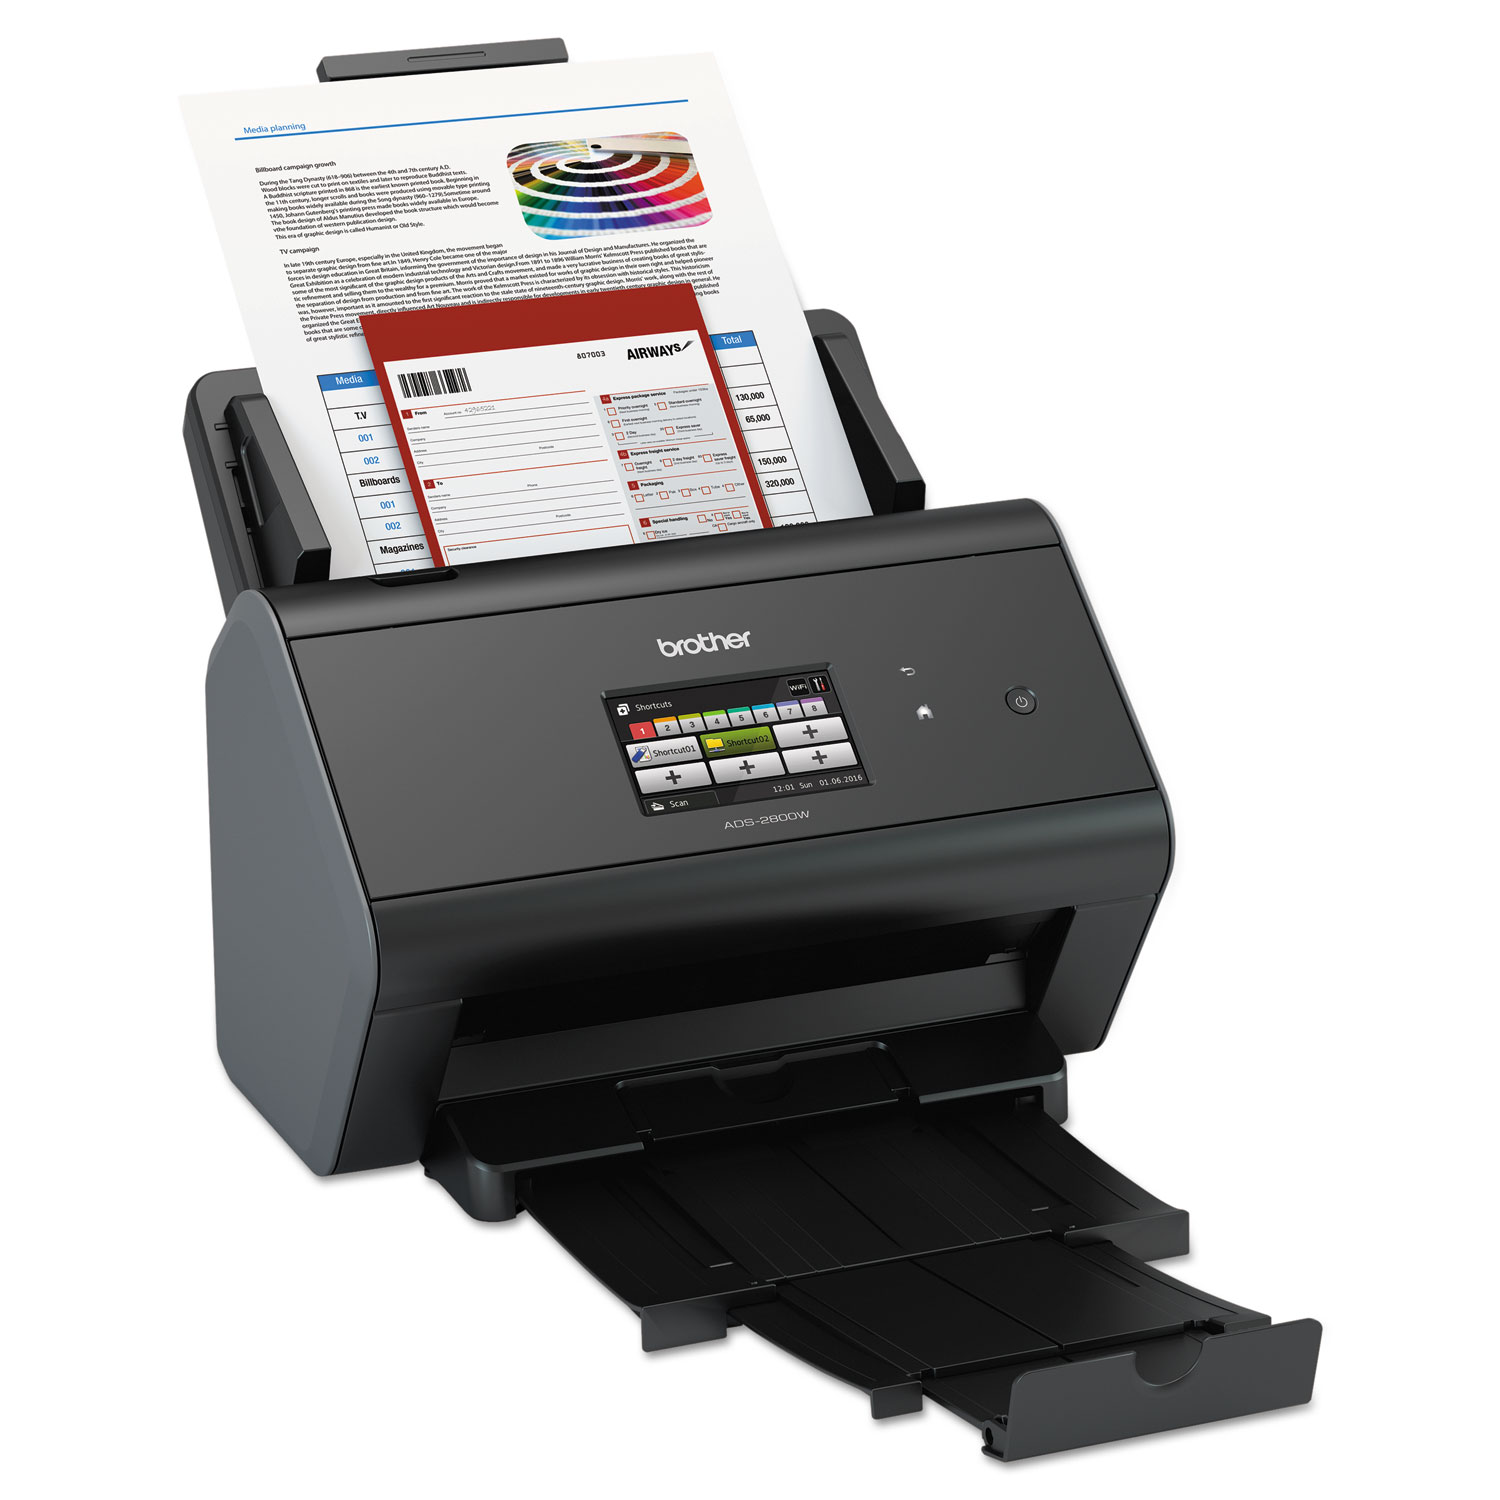 ImageCenter ADS-2800W Wireless Document Scanner for Mid to Large Size Workgroups